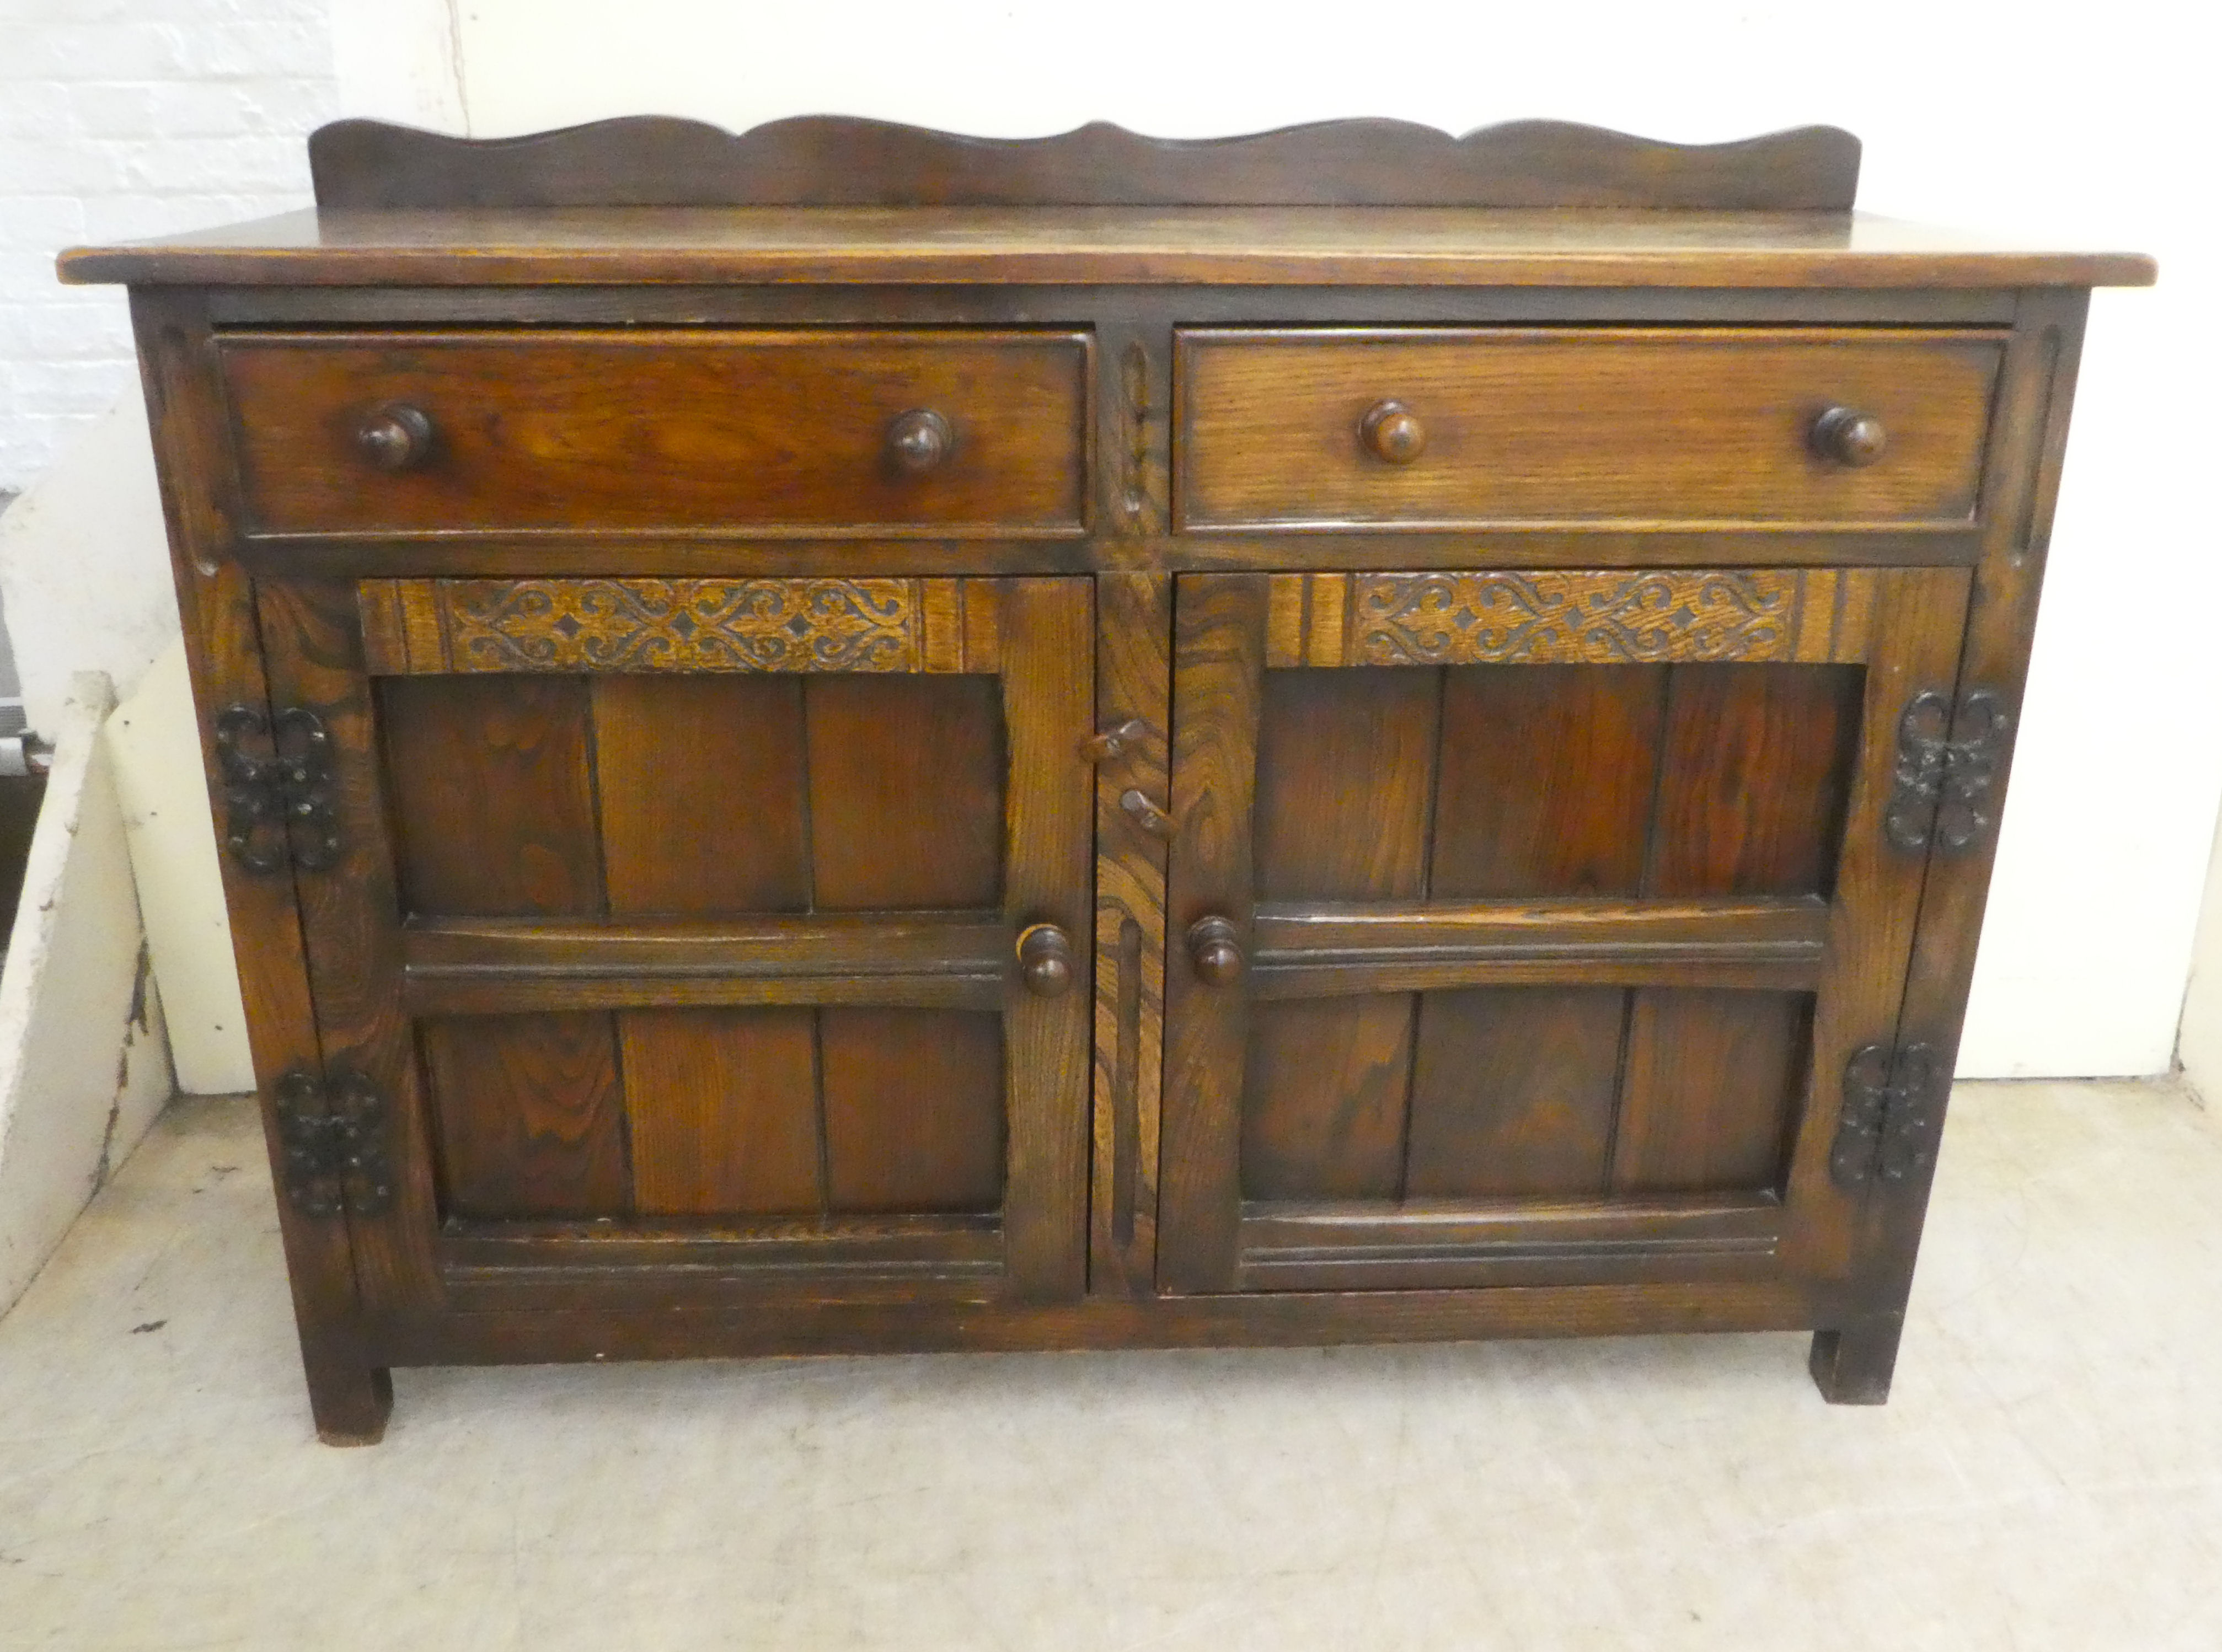 A 20thC Old English style oak dresser with two frieze drawers, over two panelled doors, raised on